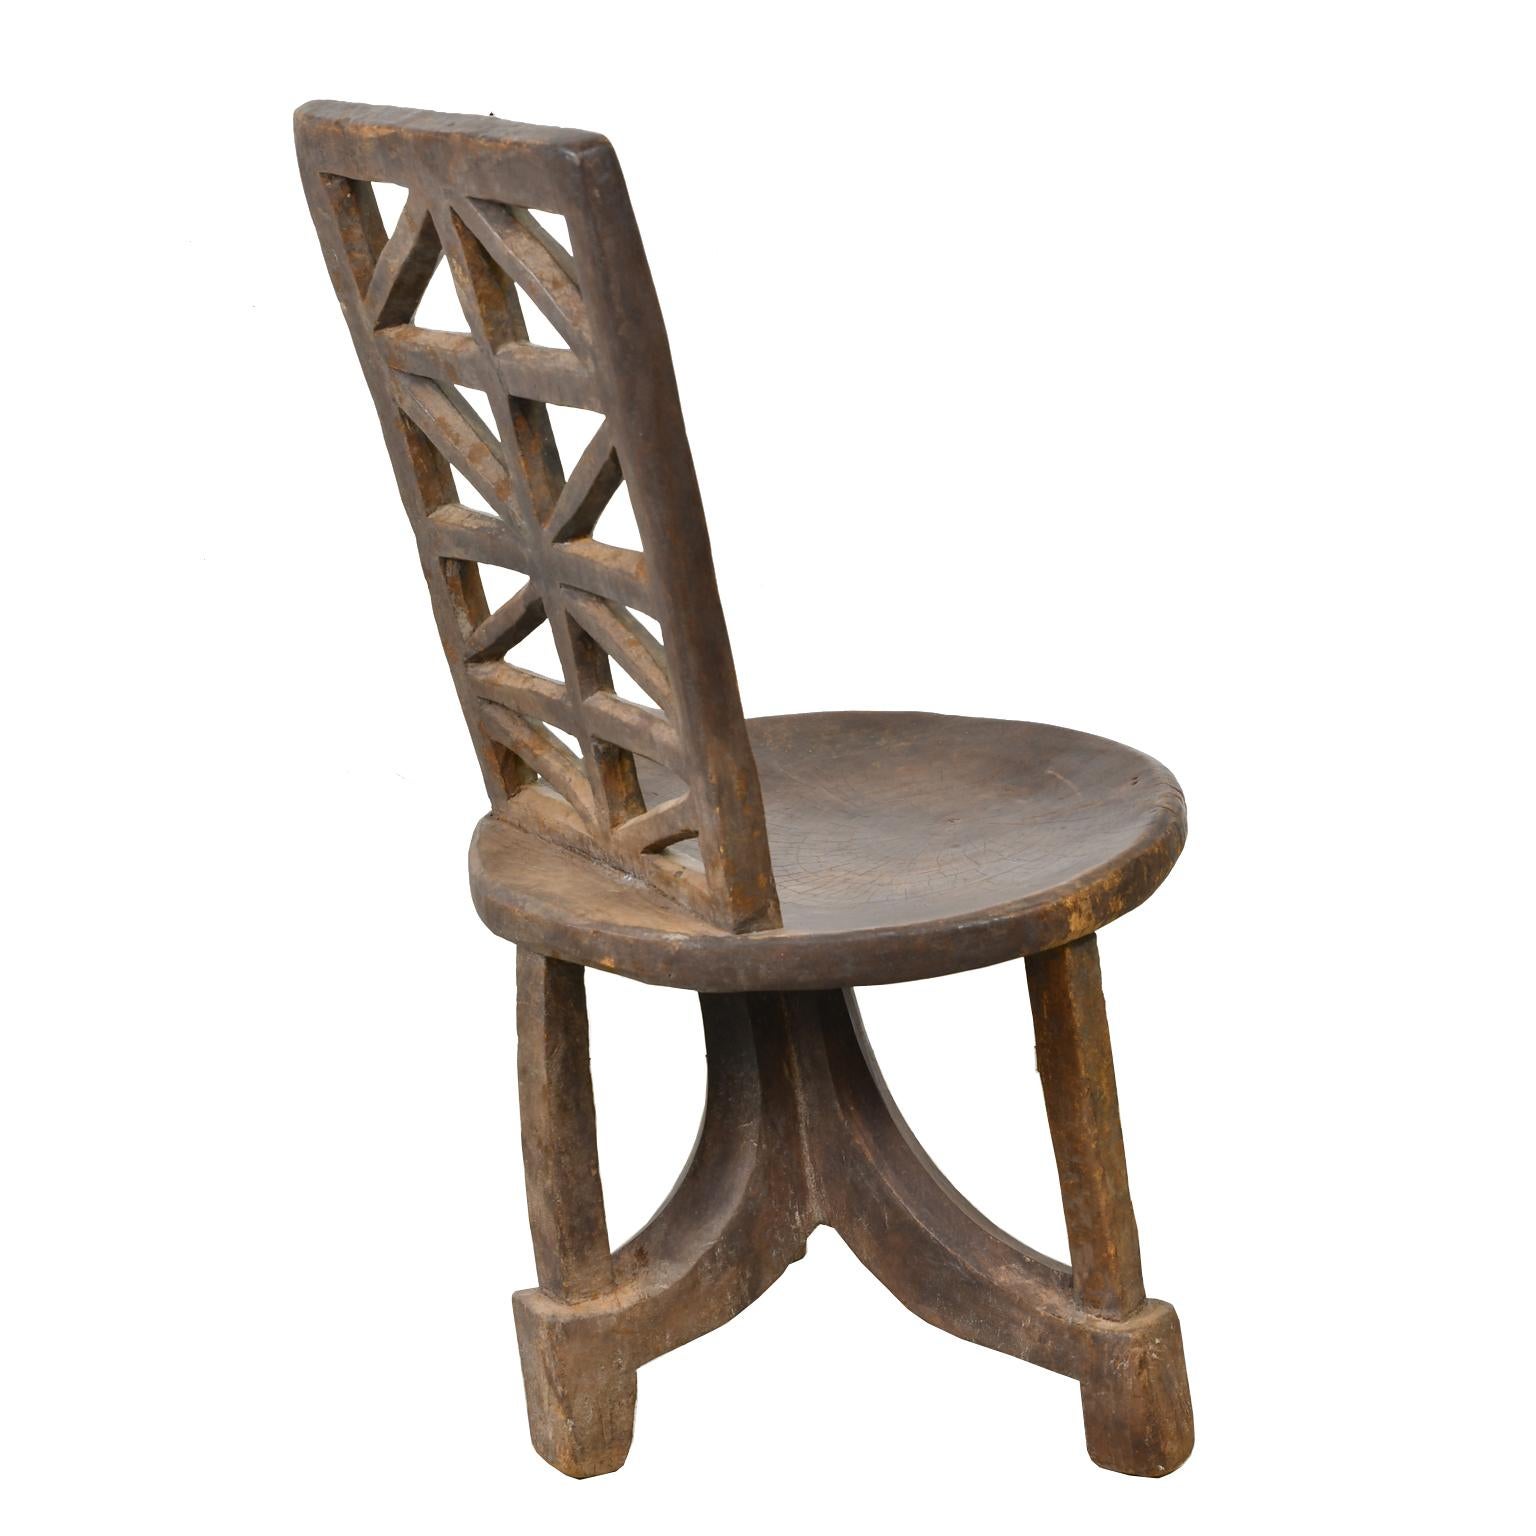 Hand-Carved African Chieftain Chair from Gurage Tribe in Ethiopia, circa Early 1900's